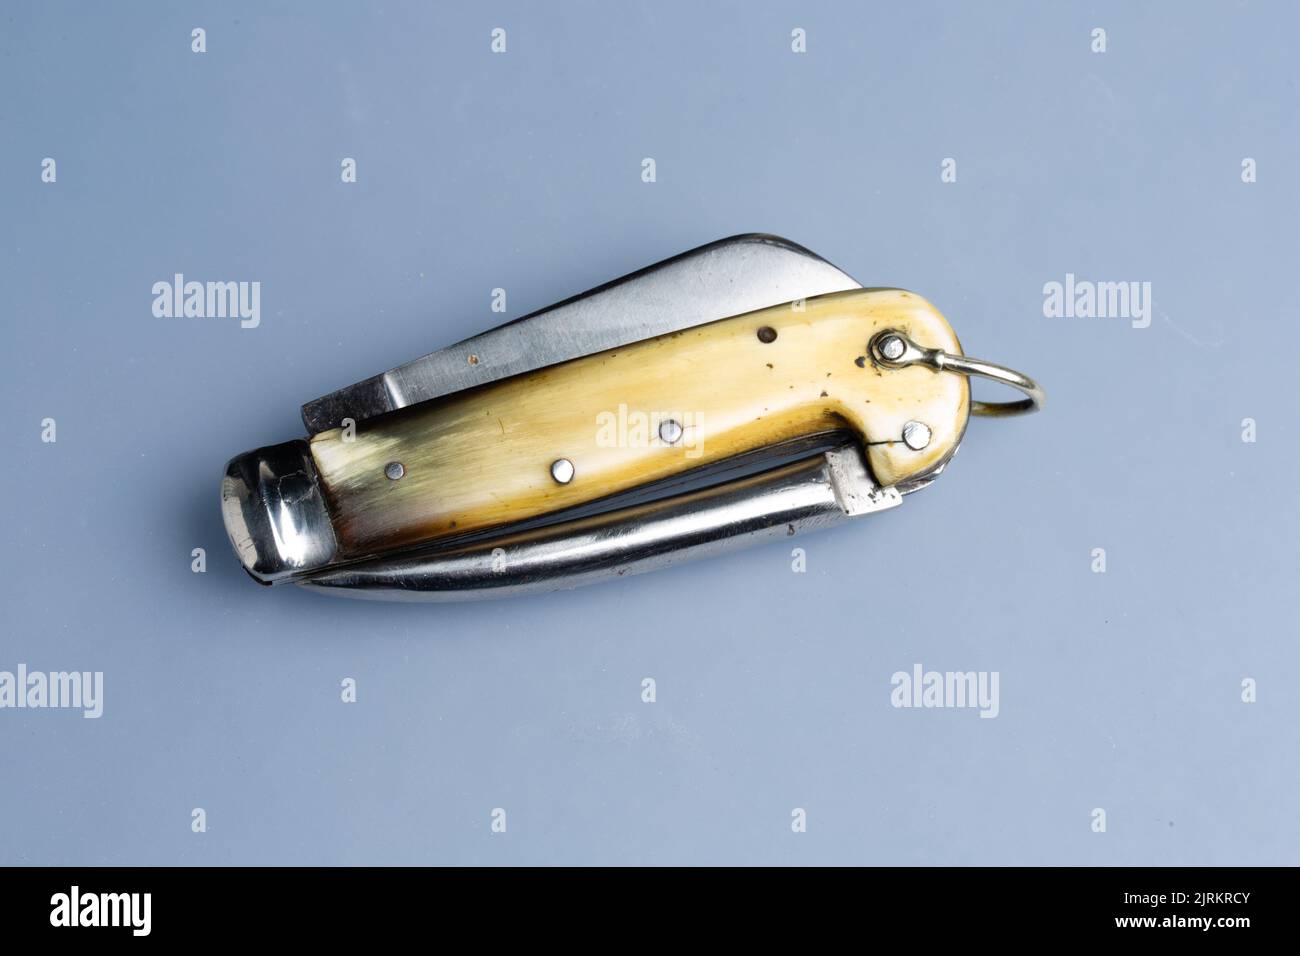 Sailing Knife Tool With Marlinspike And Shackle Key Stock Photo - Download  Image Now - iStock